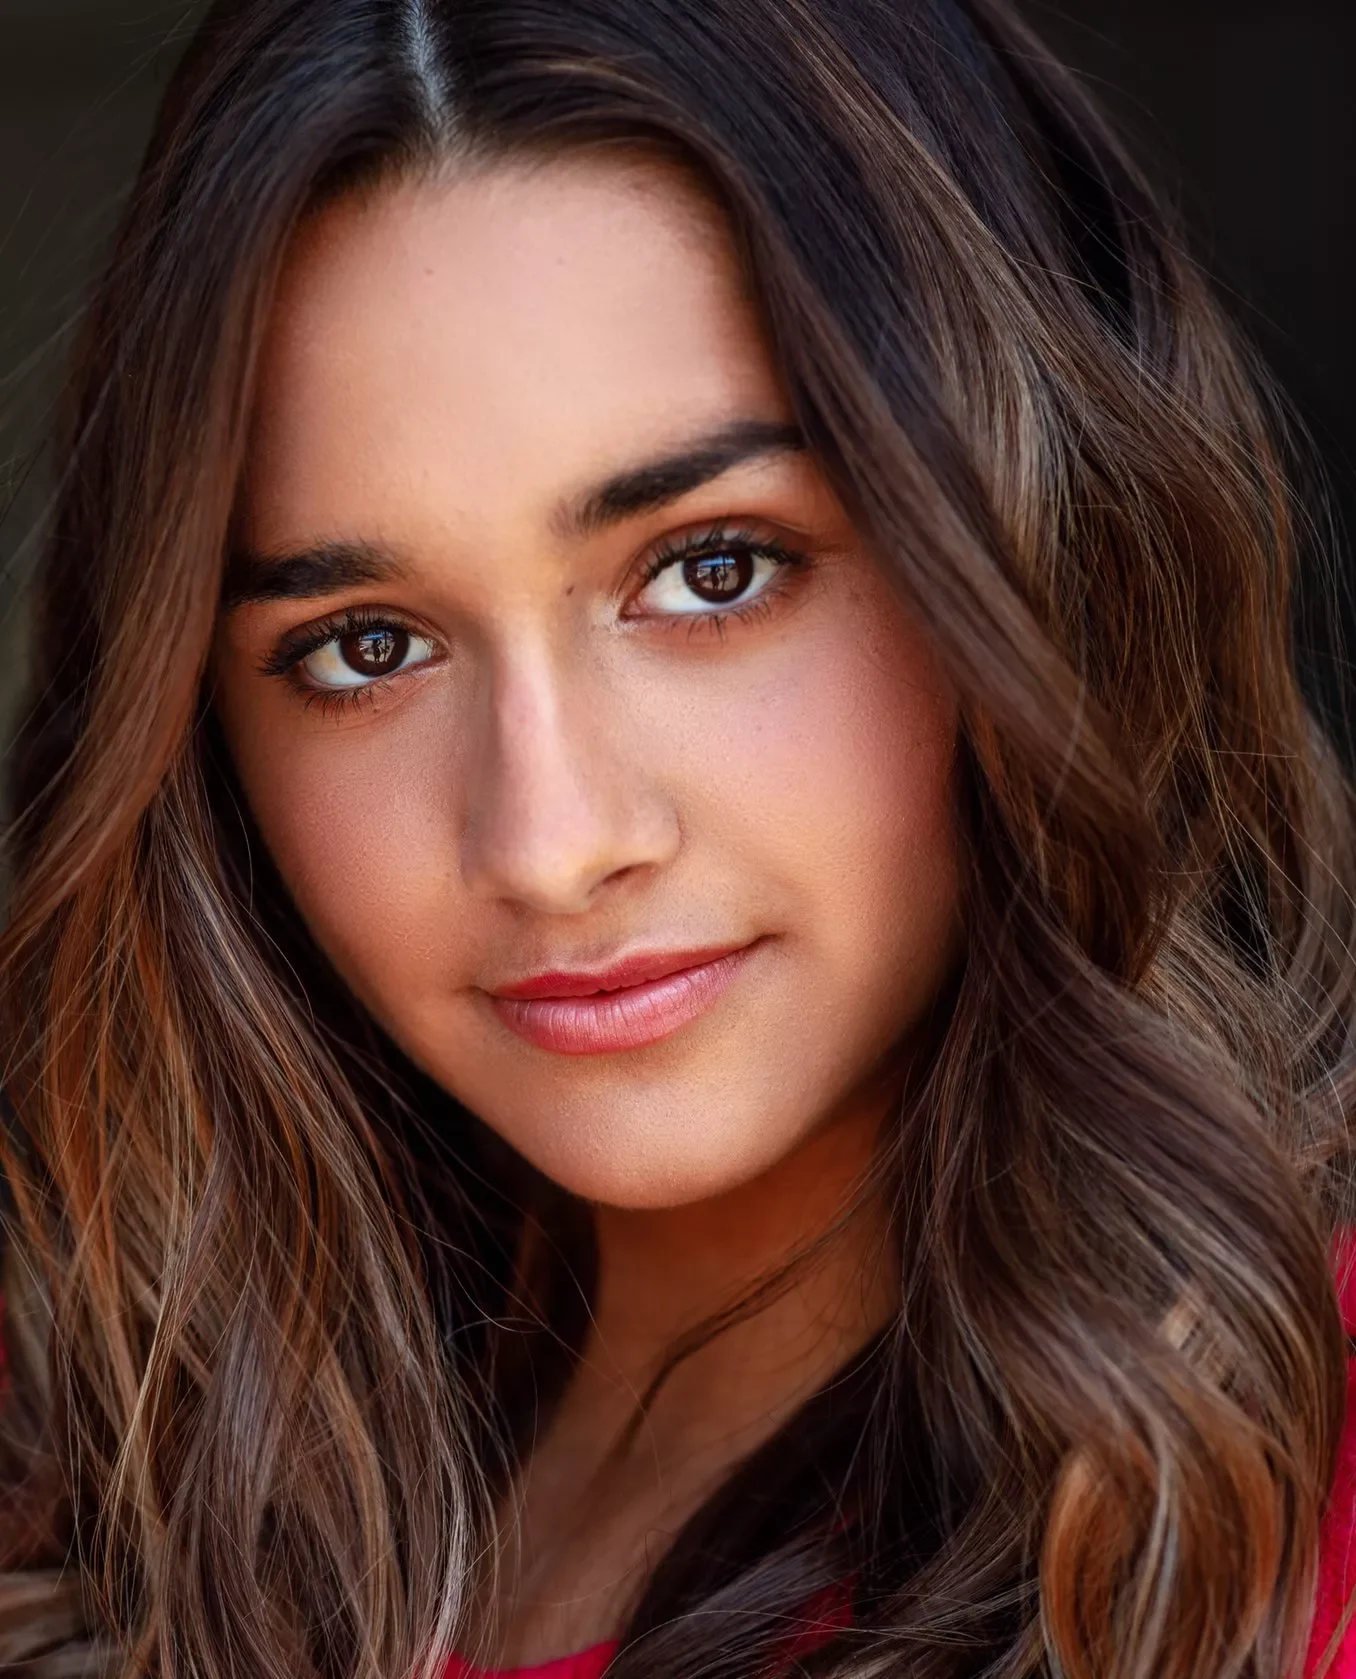 brisa lalich age, instagram, twitter, photos, images, height, tv shows, movies, age, birthday, date of birth, parents, hometown, actress, america, cheer leader, football